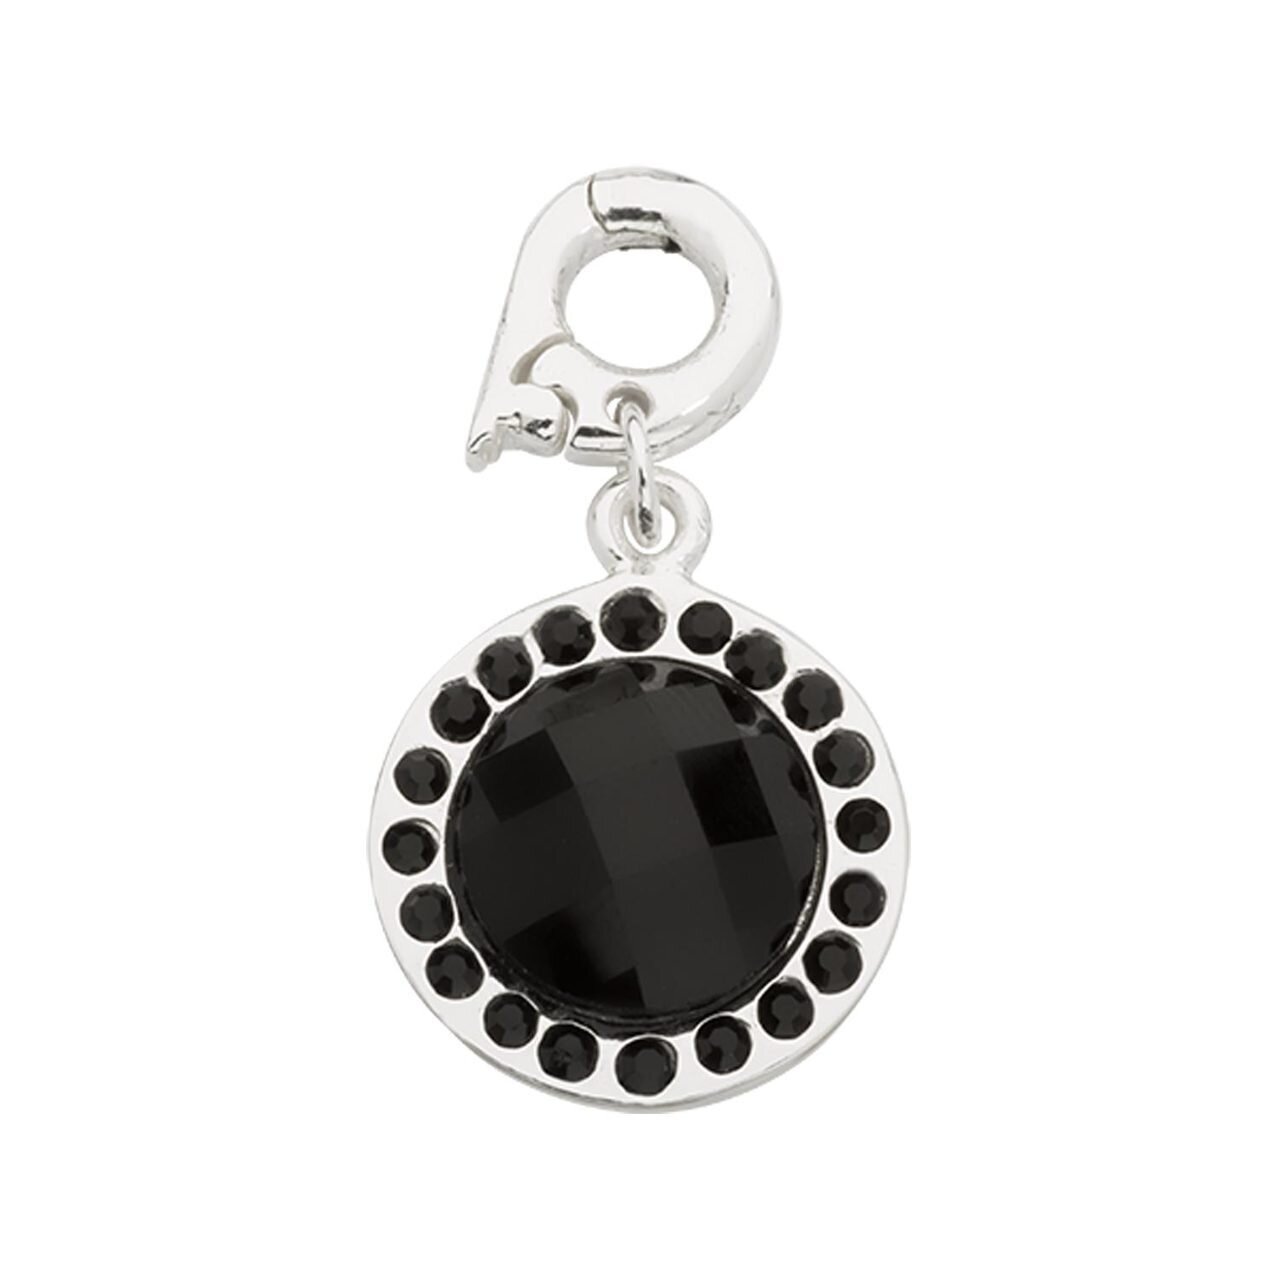 Nikki Lissoni Chic Black Mirror Glass Charm with Swarovski Crystals Silver-plated 15mm D1244SS